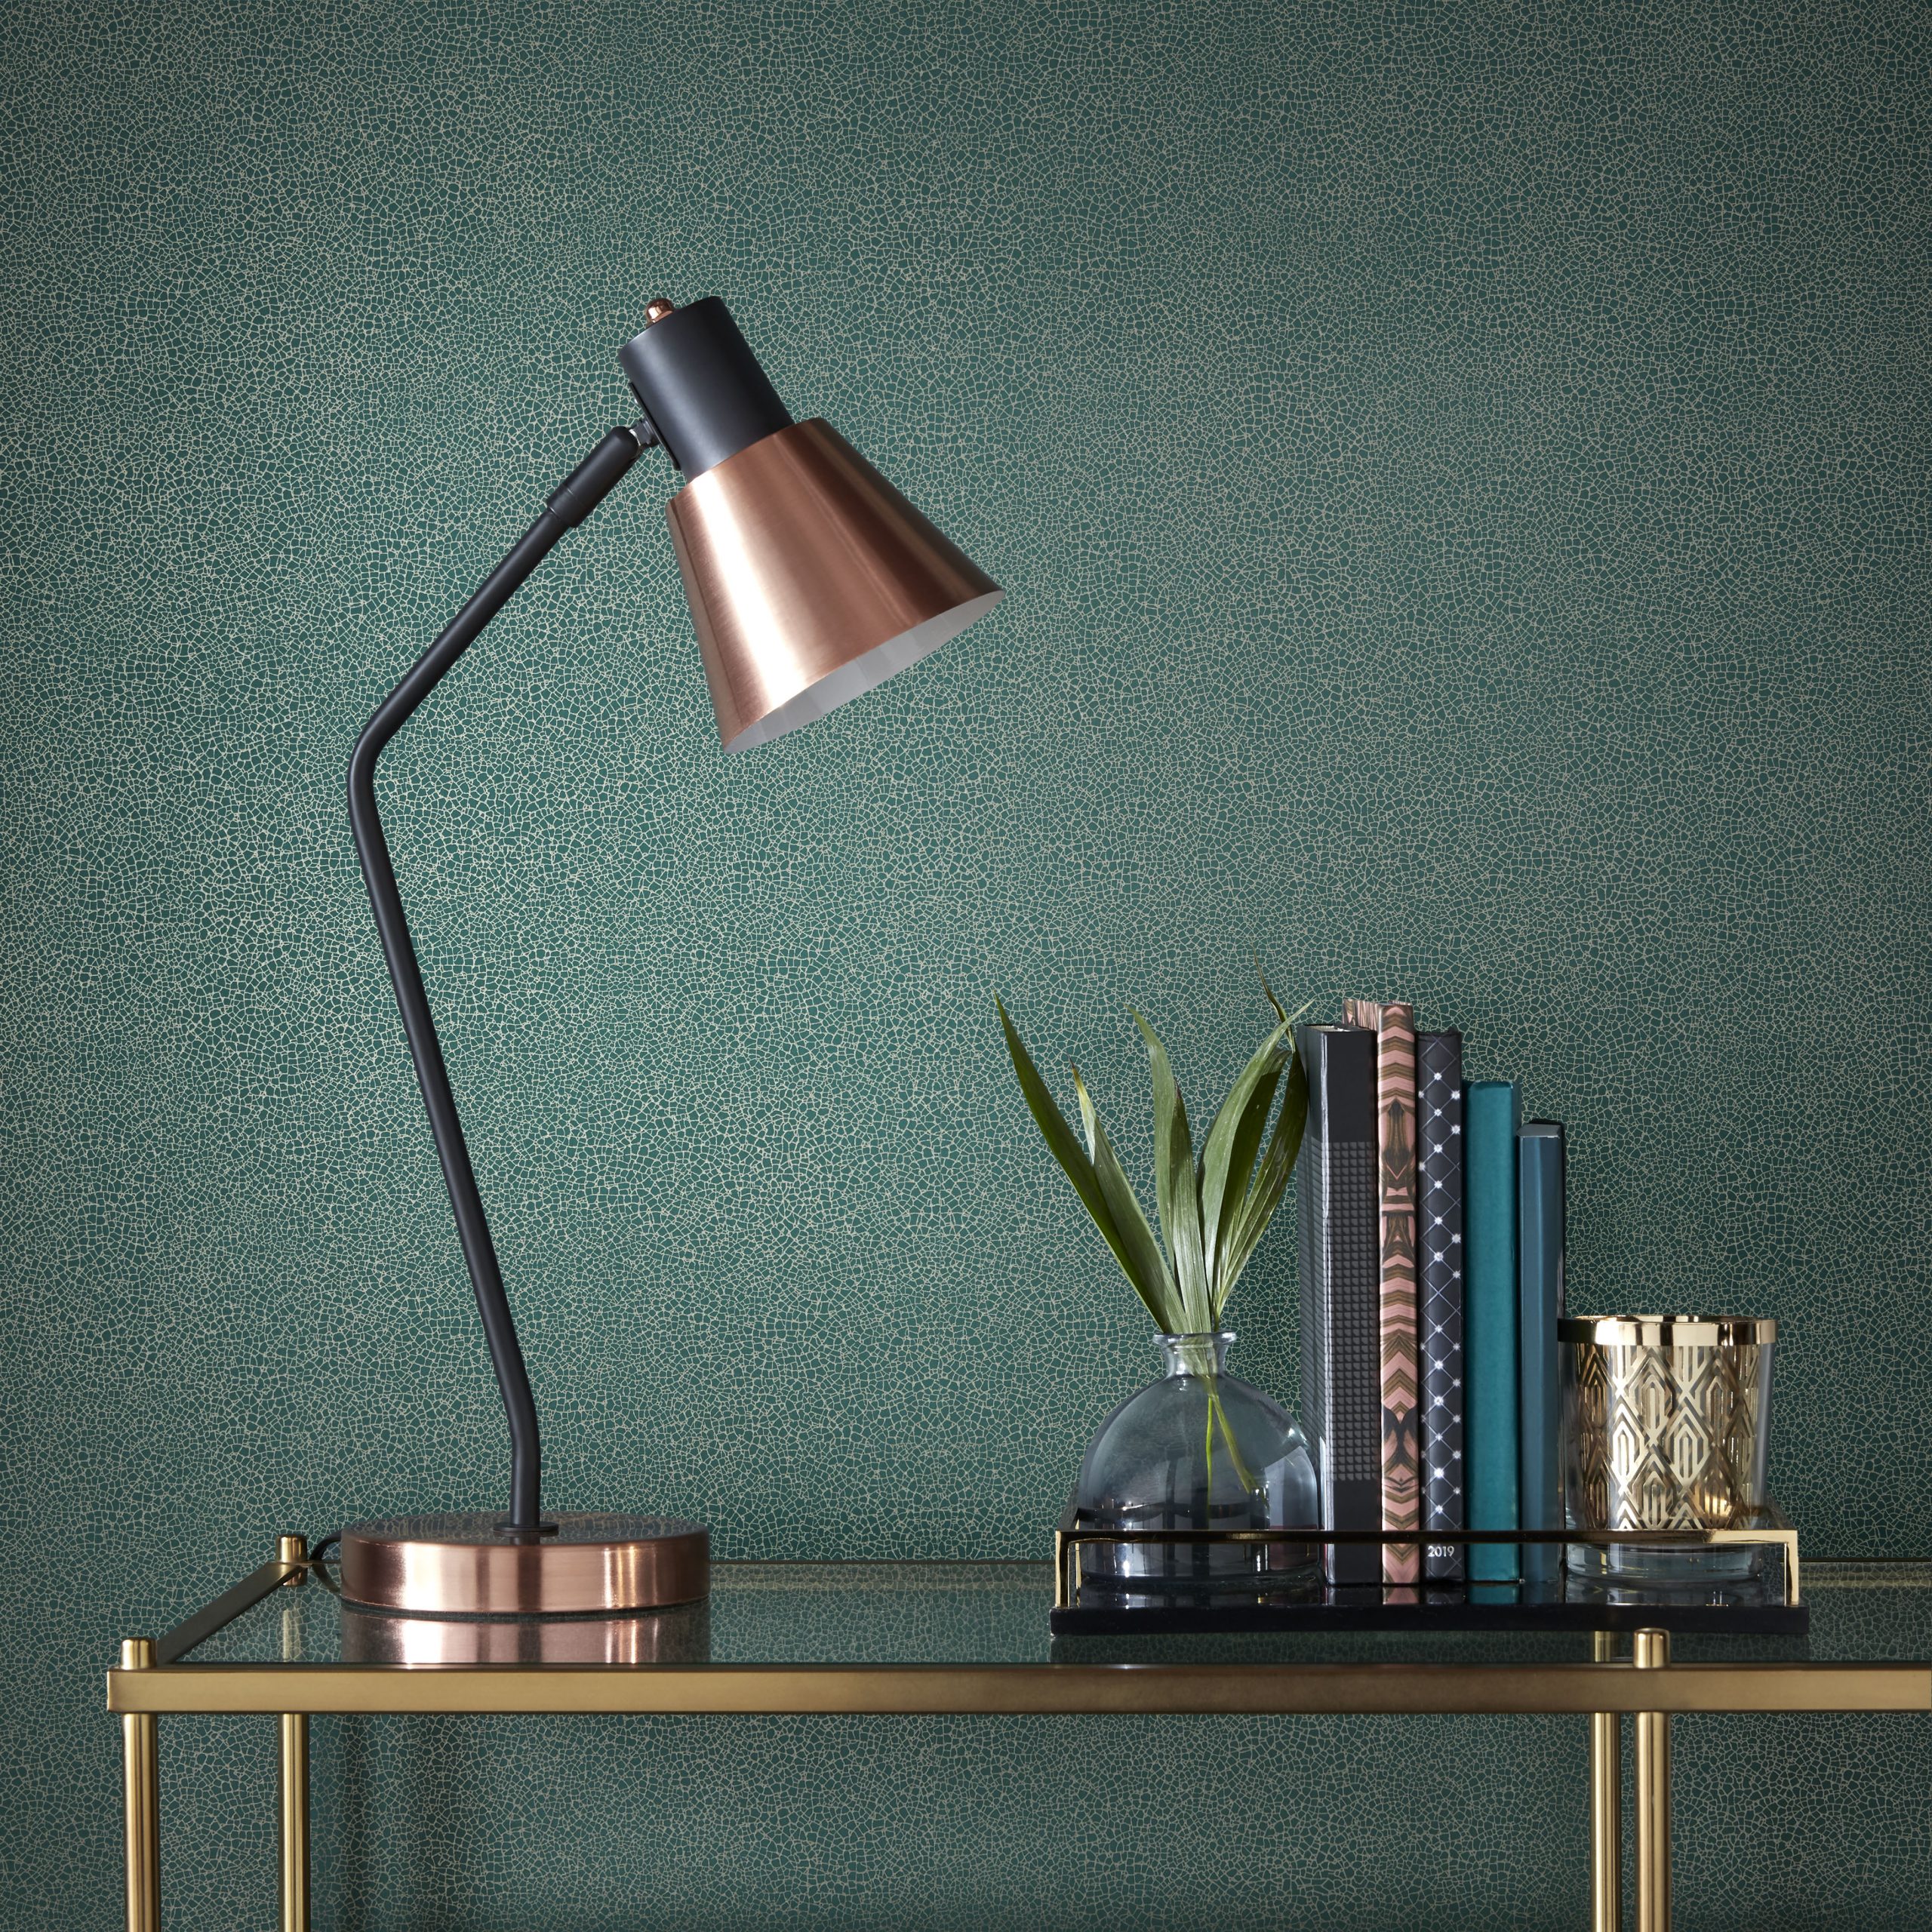 Tapet Emile, Emerald Green Luxury Crackle, 1838 Wallcoverings, 5.3mp / rola 1838 Wallcoverings